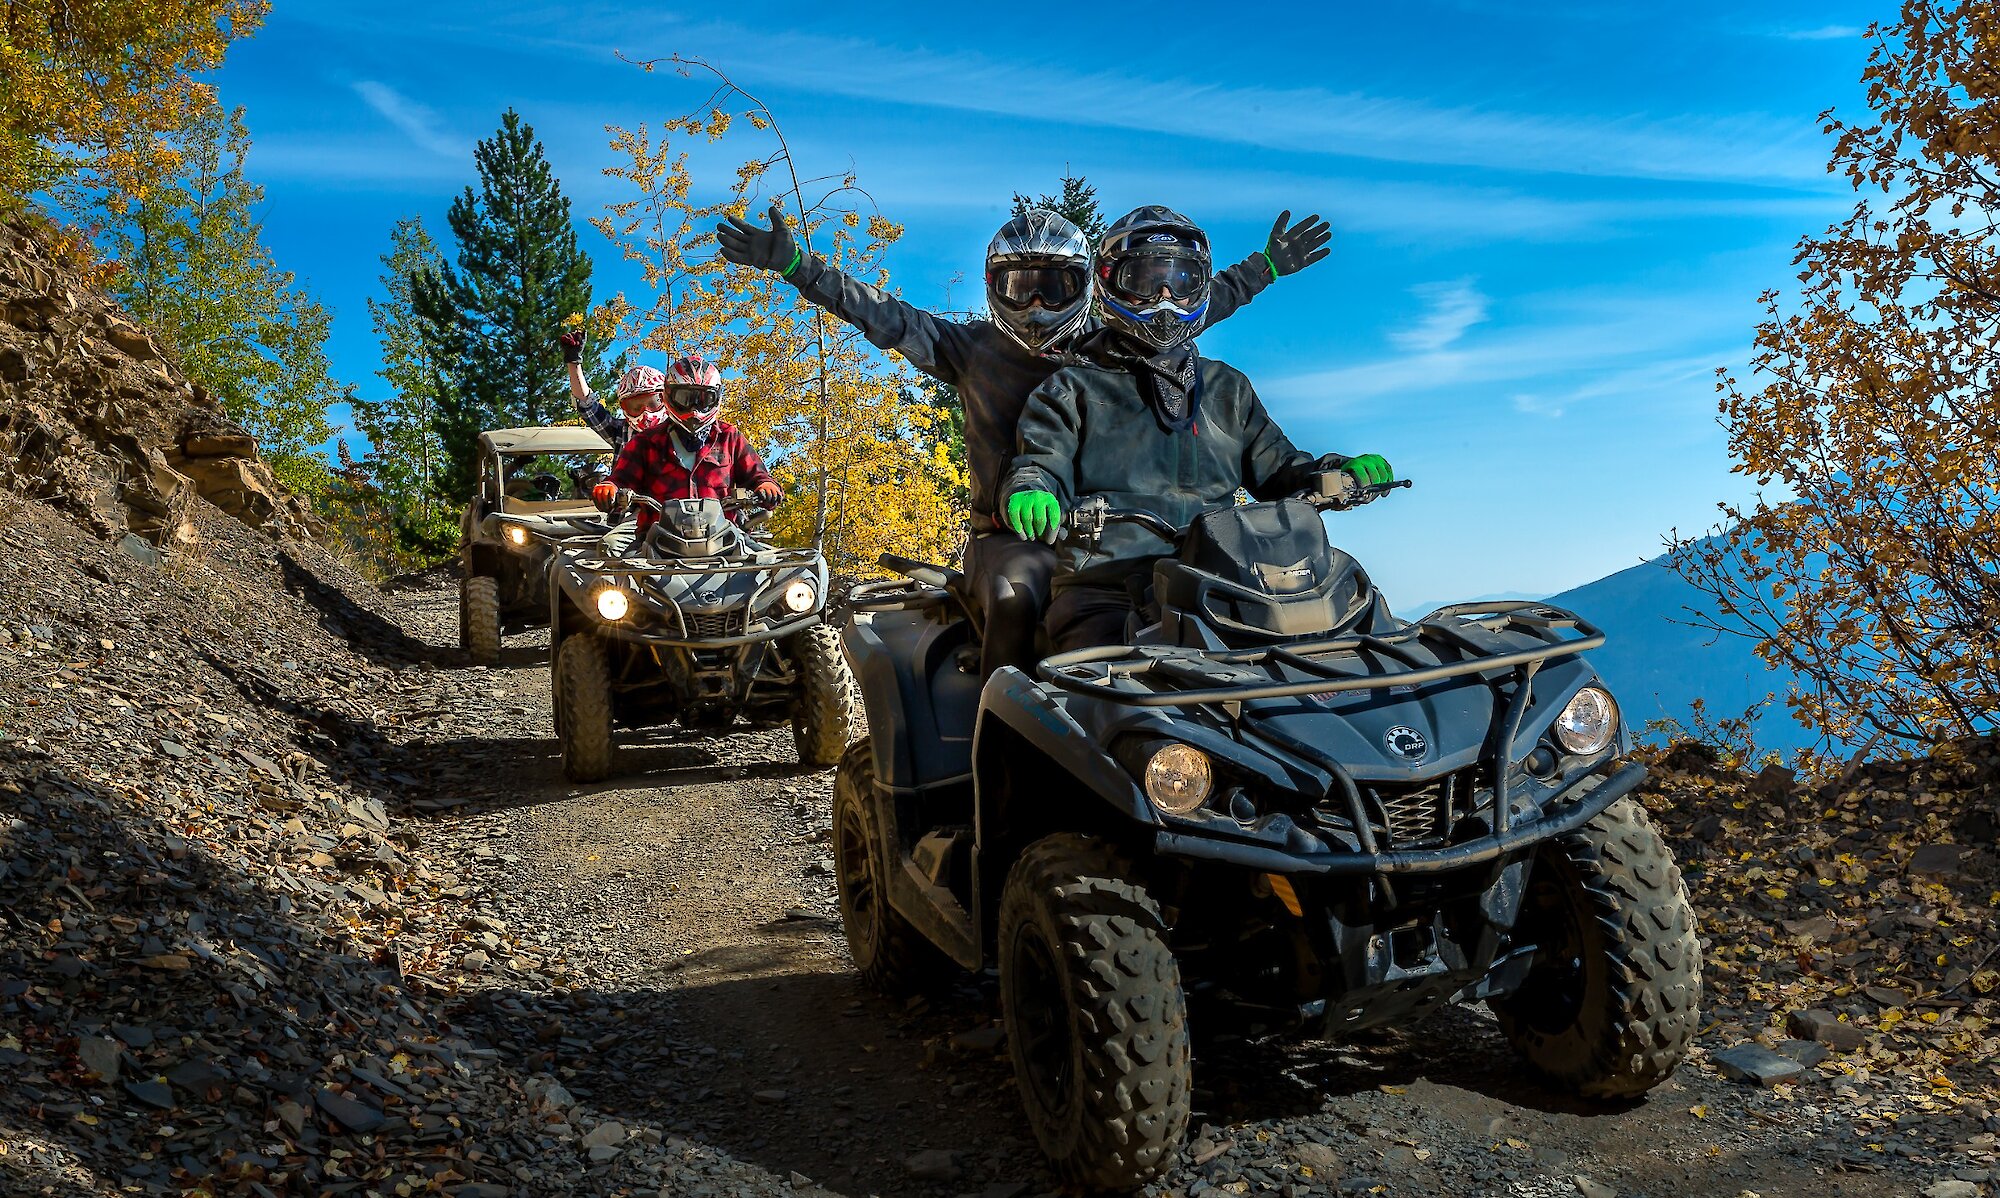 Guests enjoying an ATV tour in BC